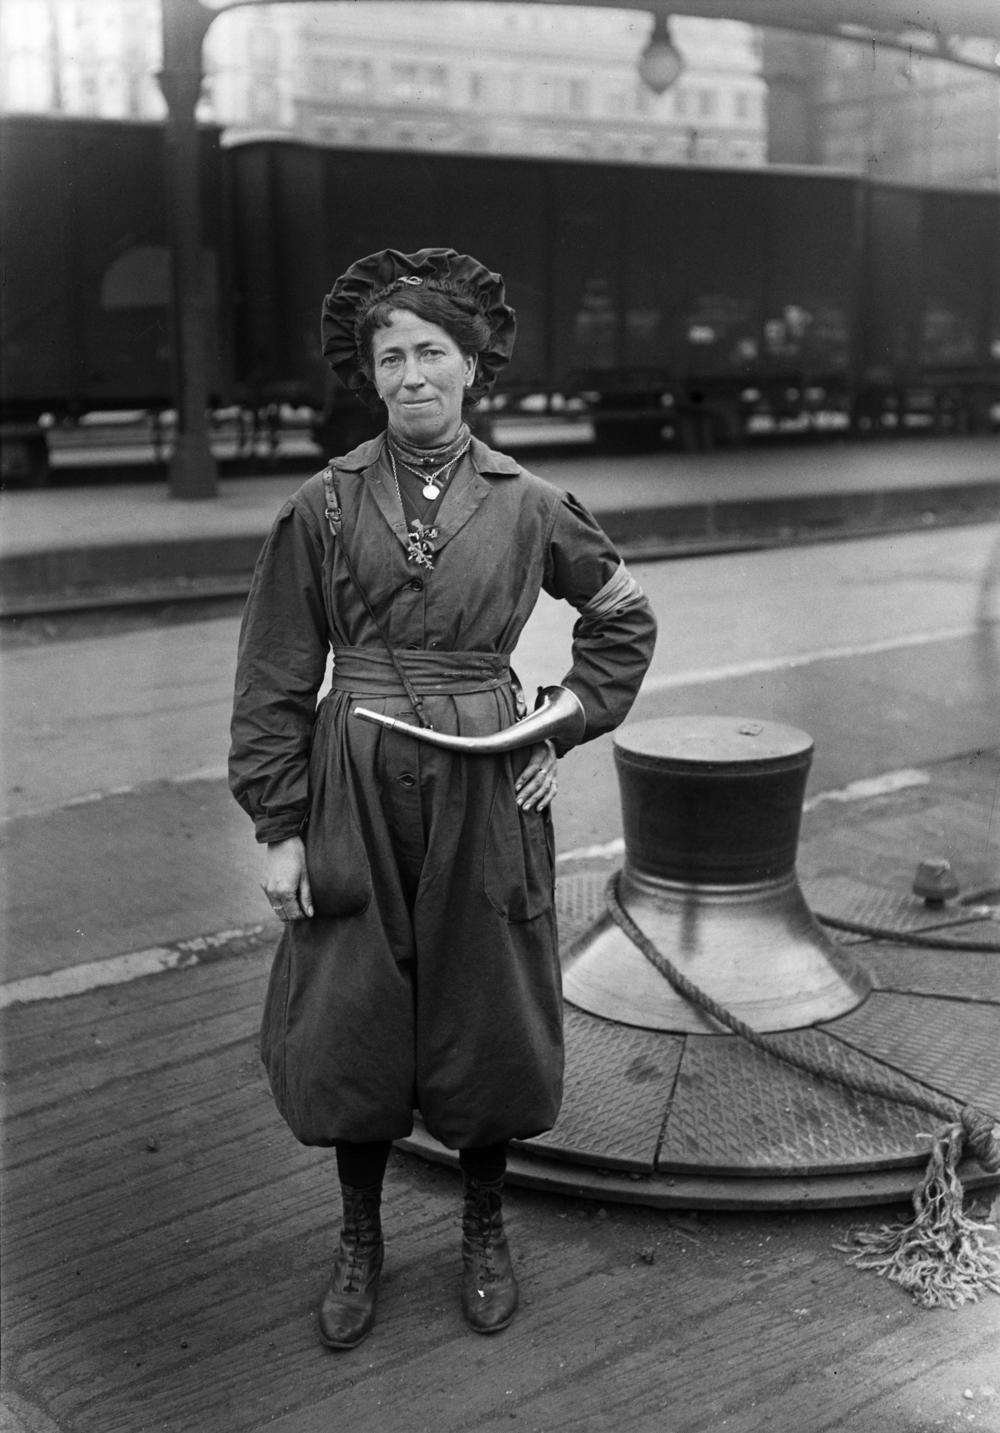 A conductor for the Paris Trolley Company, 1917